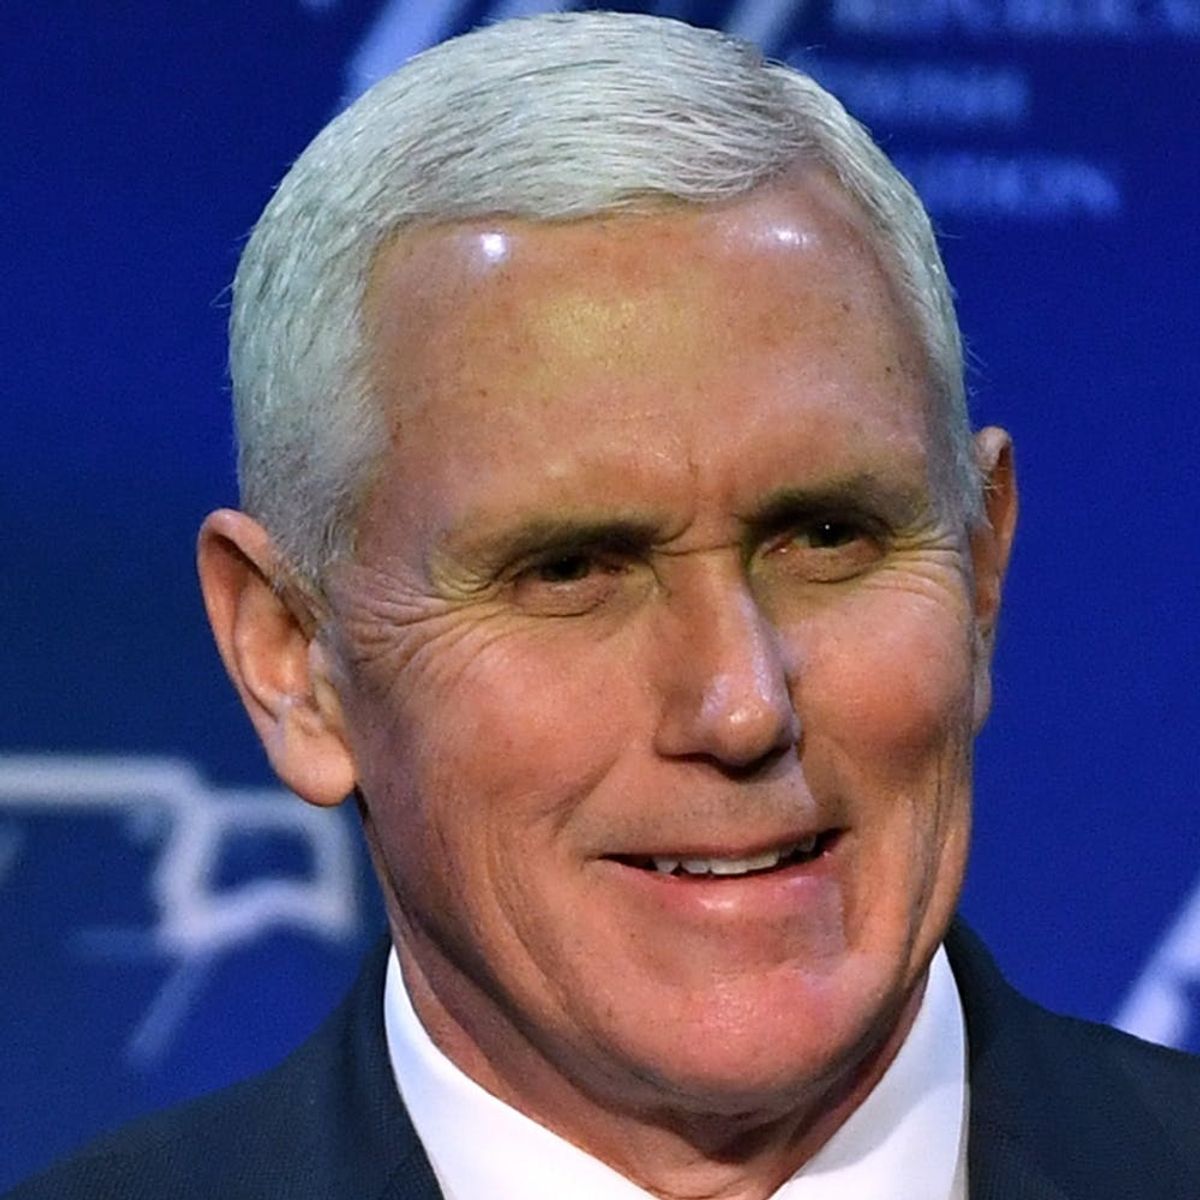 This Is What VP Mike Pence Has to Say About That Email Sitch